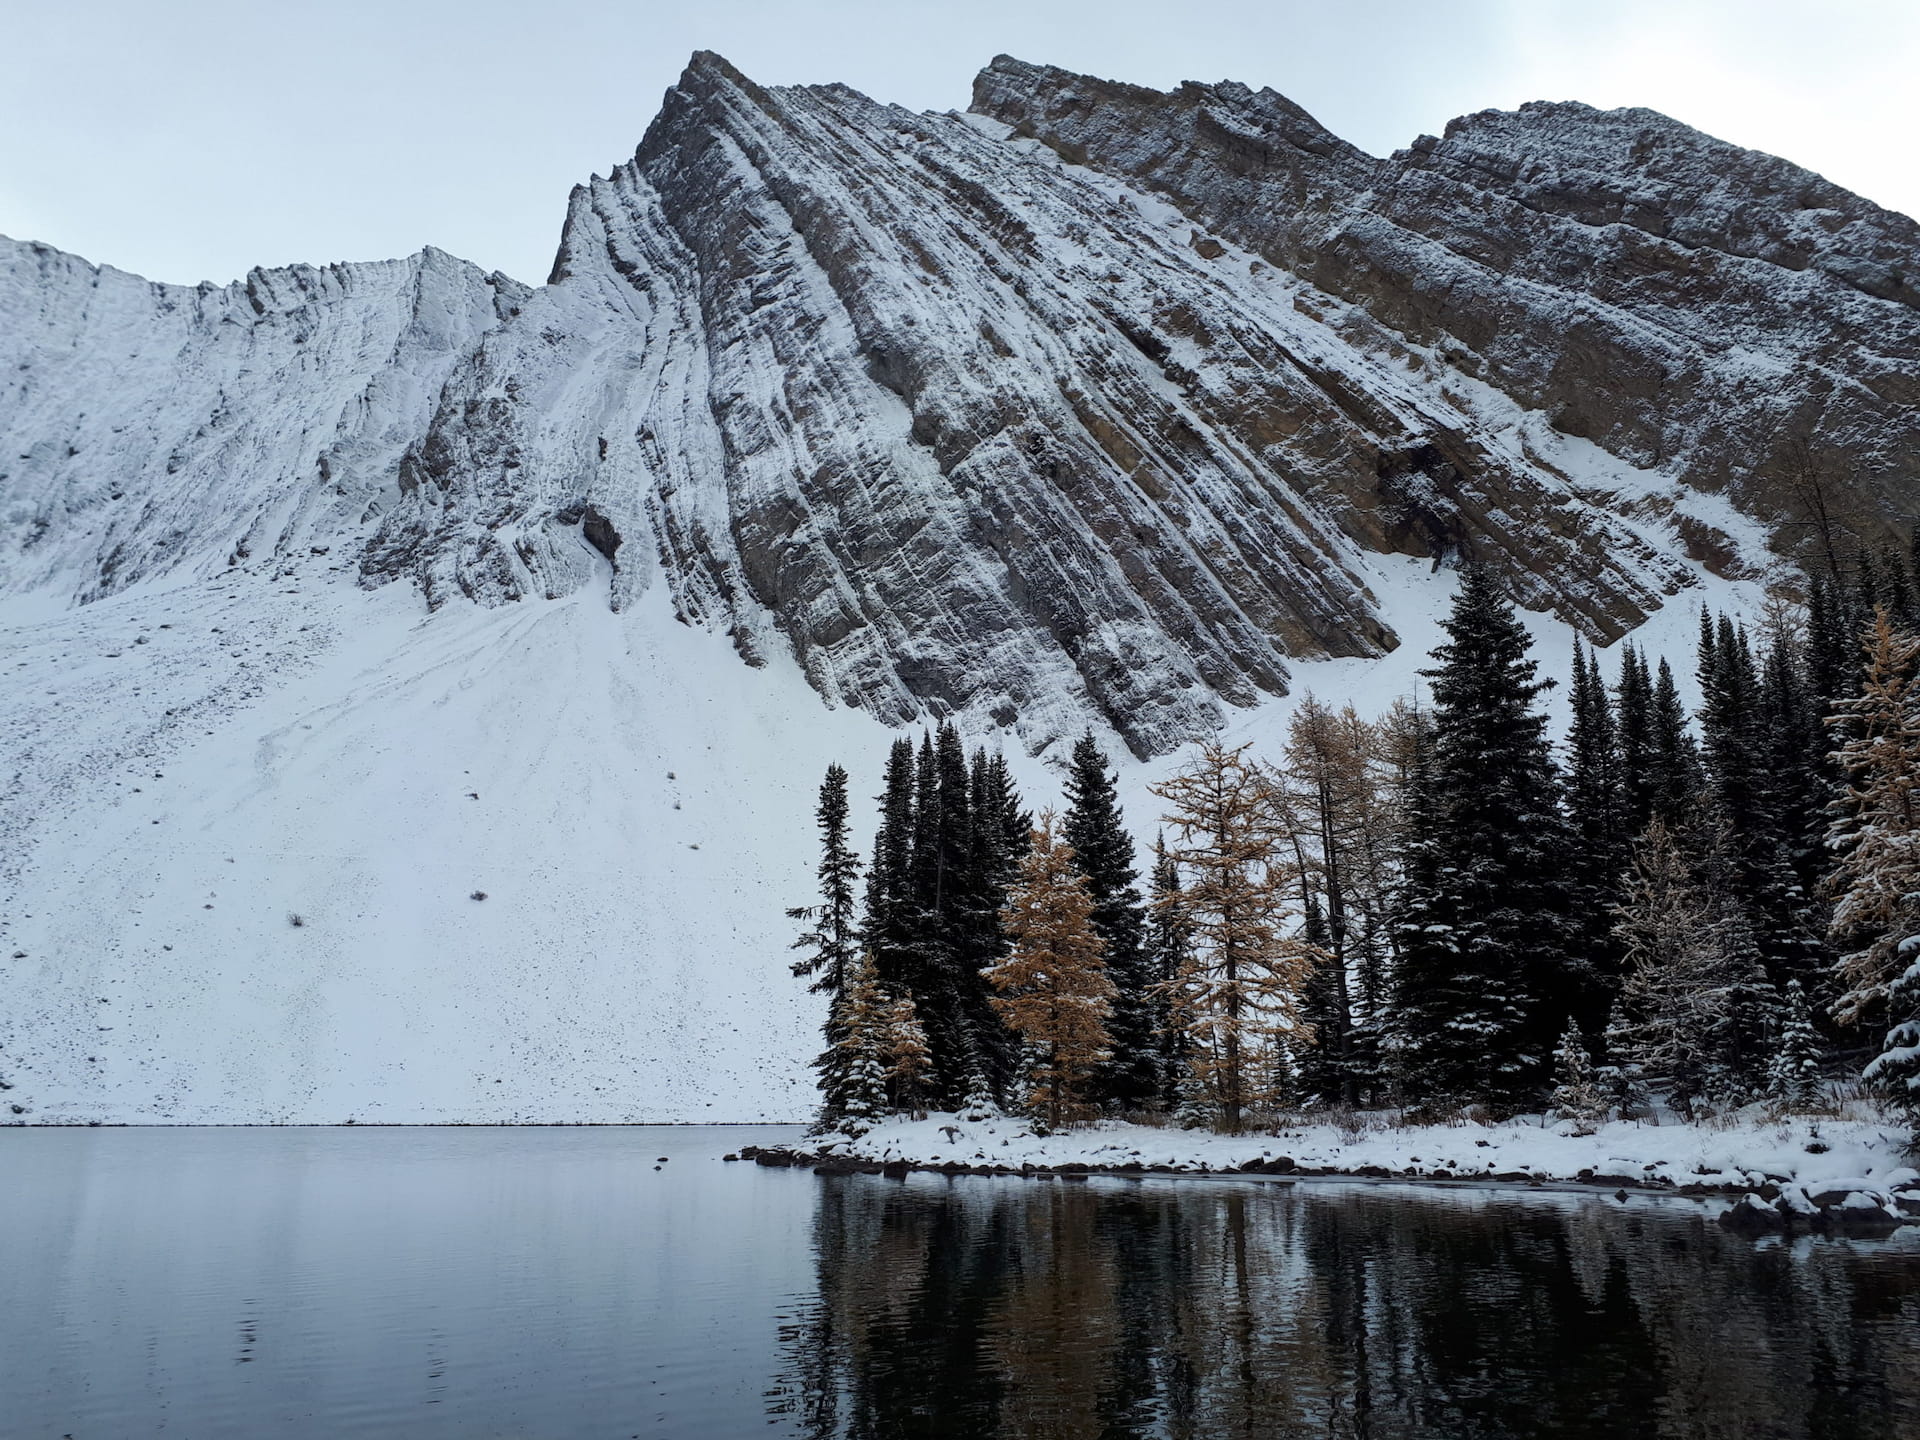 A winter scene at Chester Lake with the lake black snow-covered trees and the mountain jutting upwards to fill the frame of the image.